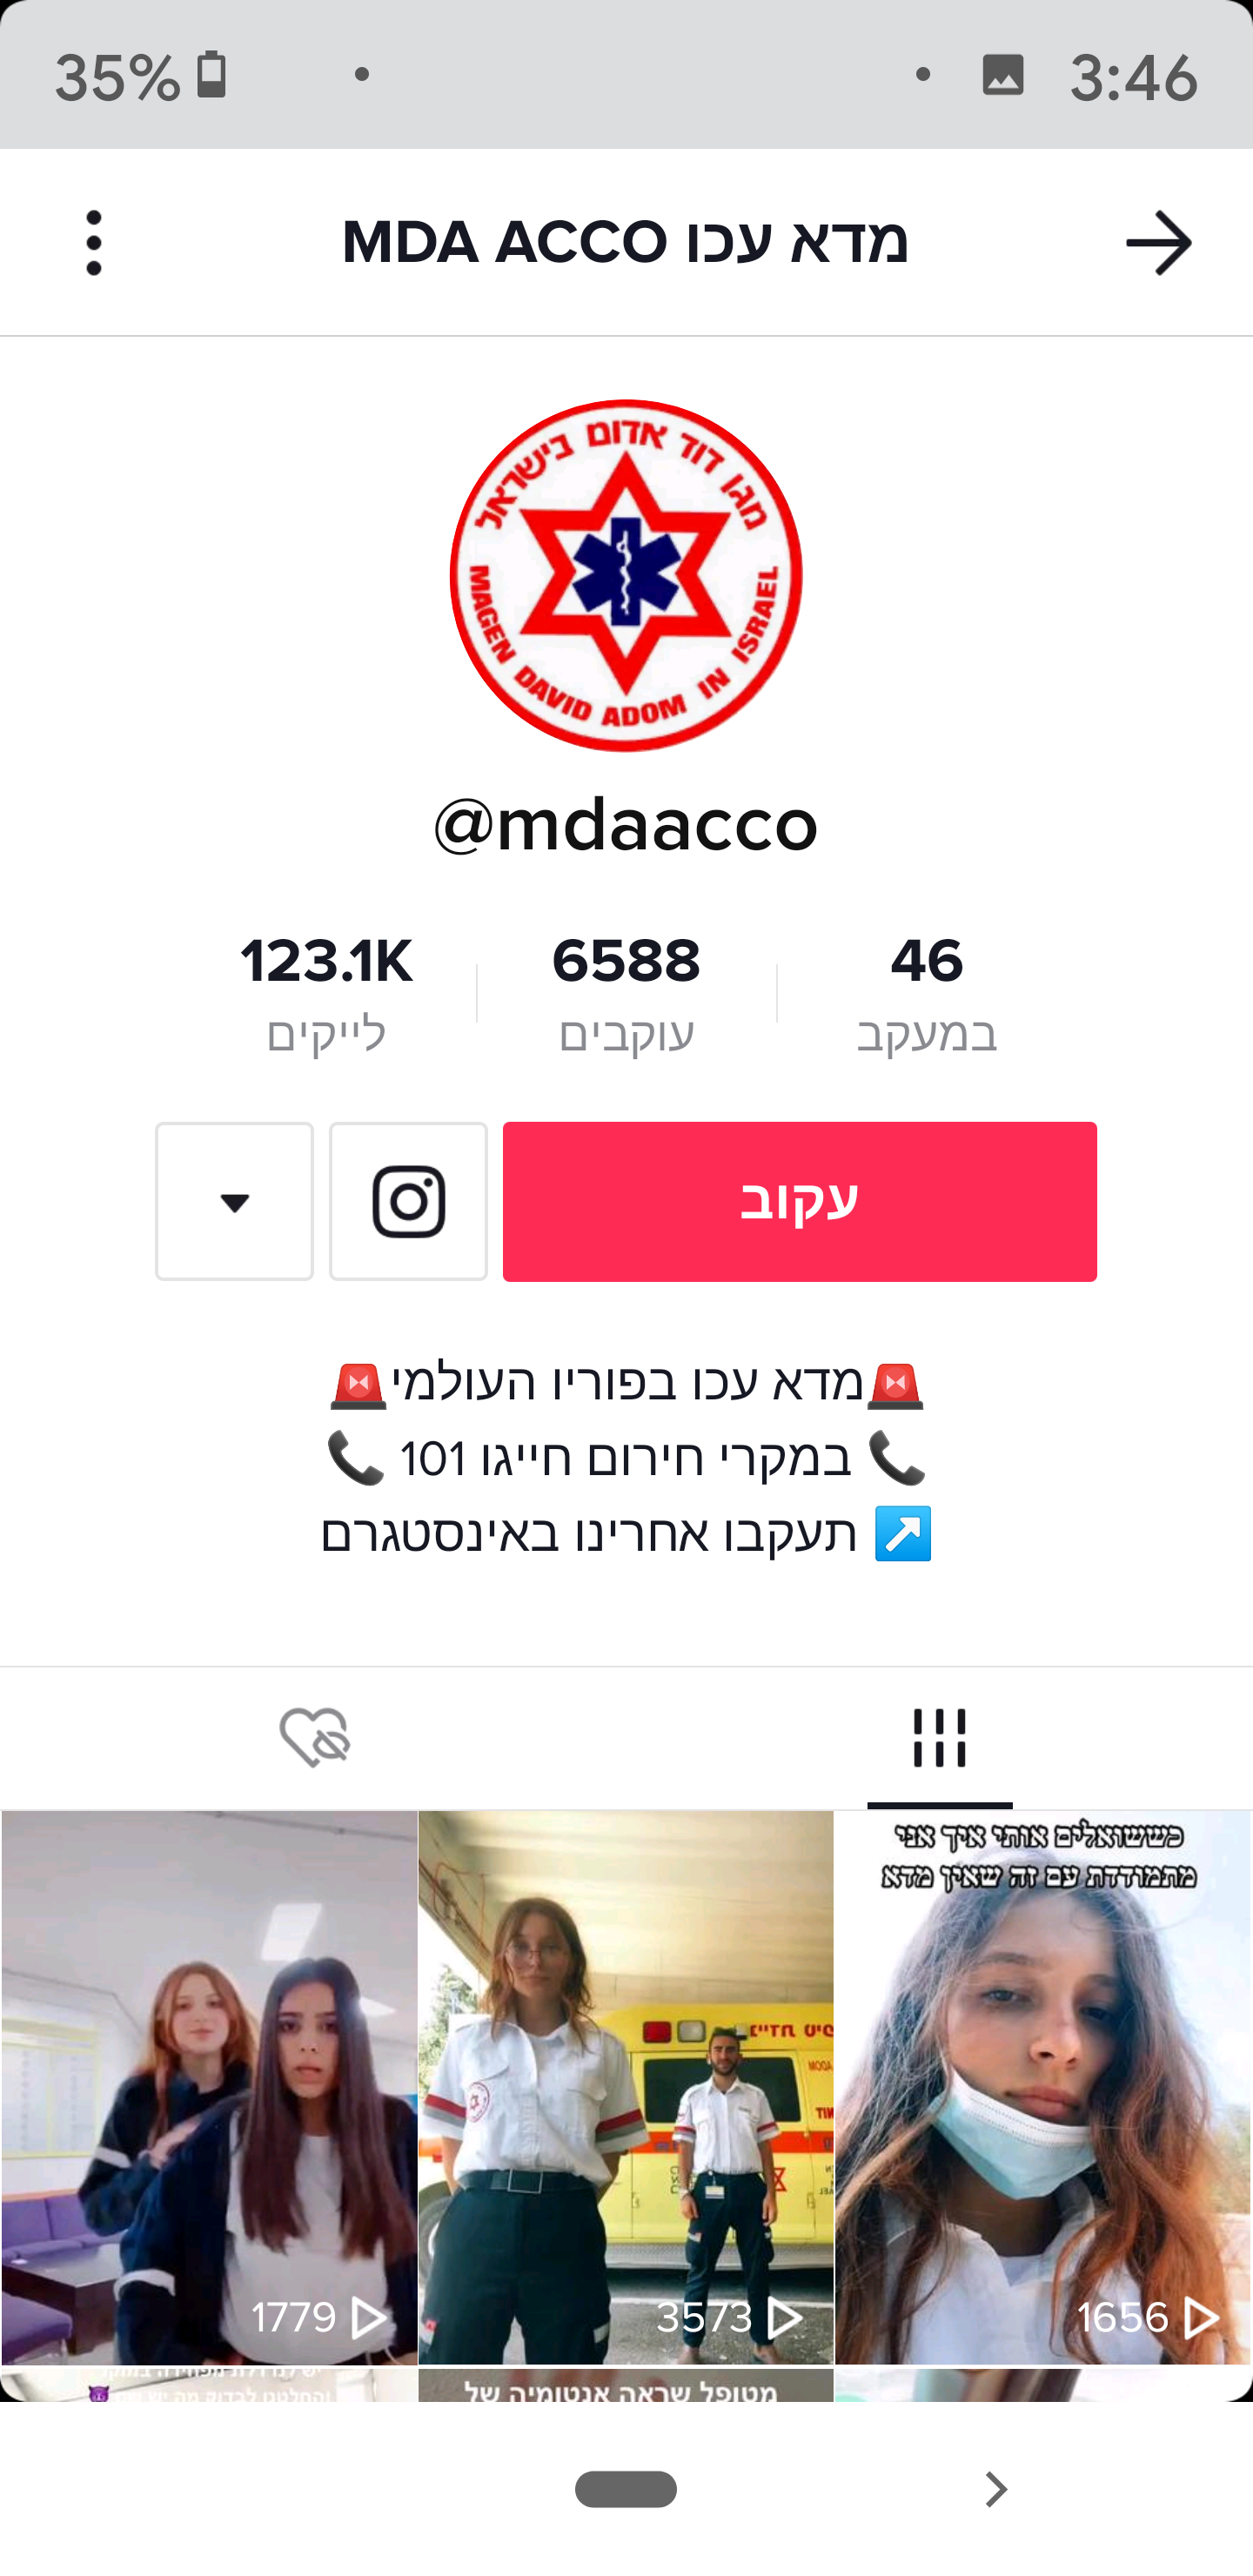 Branch of the Magen David Adom (Israeli Red Cross) that used TikTok, mainly to enlist young volunteers. It has already collected nearly 7000 followers, many thousands of views, and more than 100,000 likes.